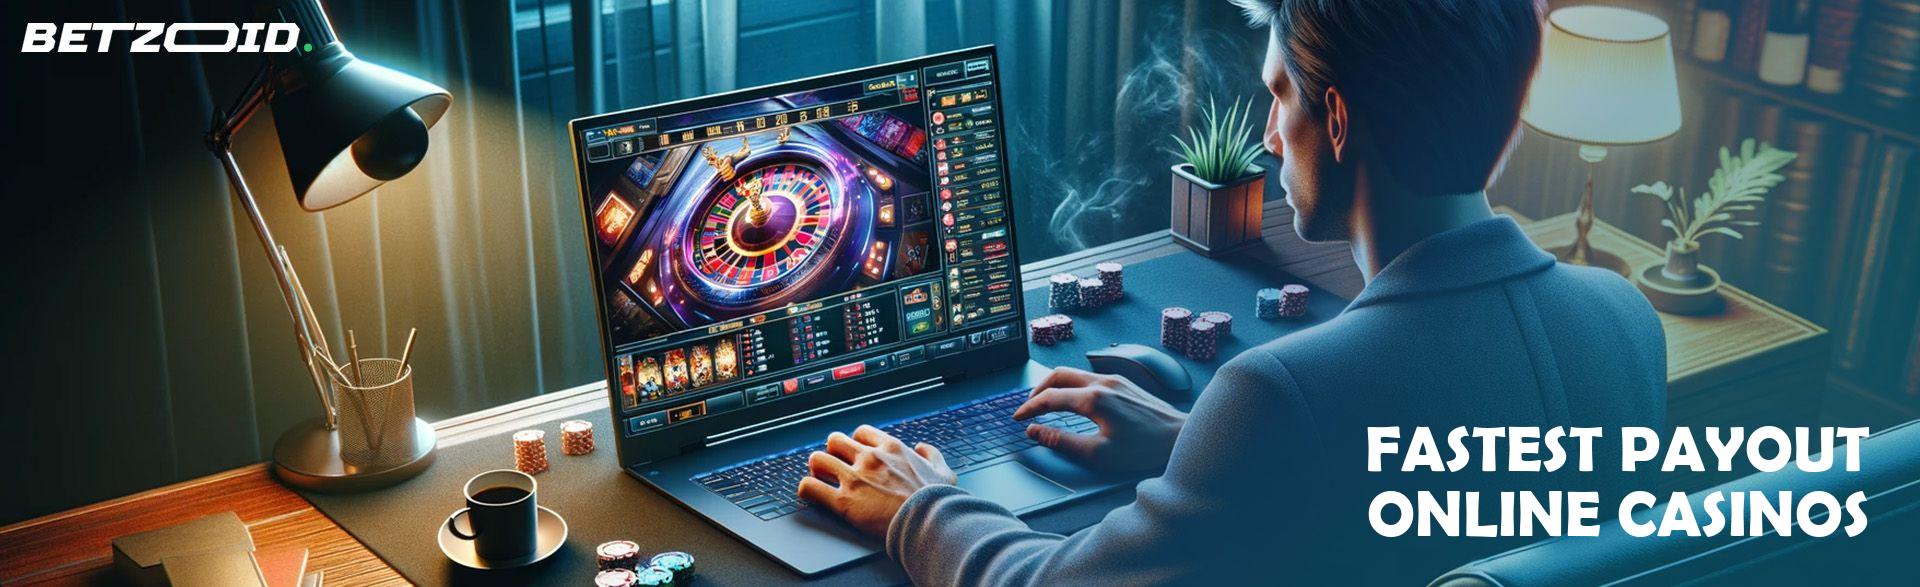 Fastest Payout Online Casinos.